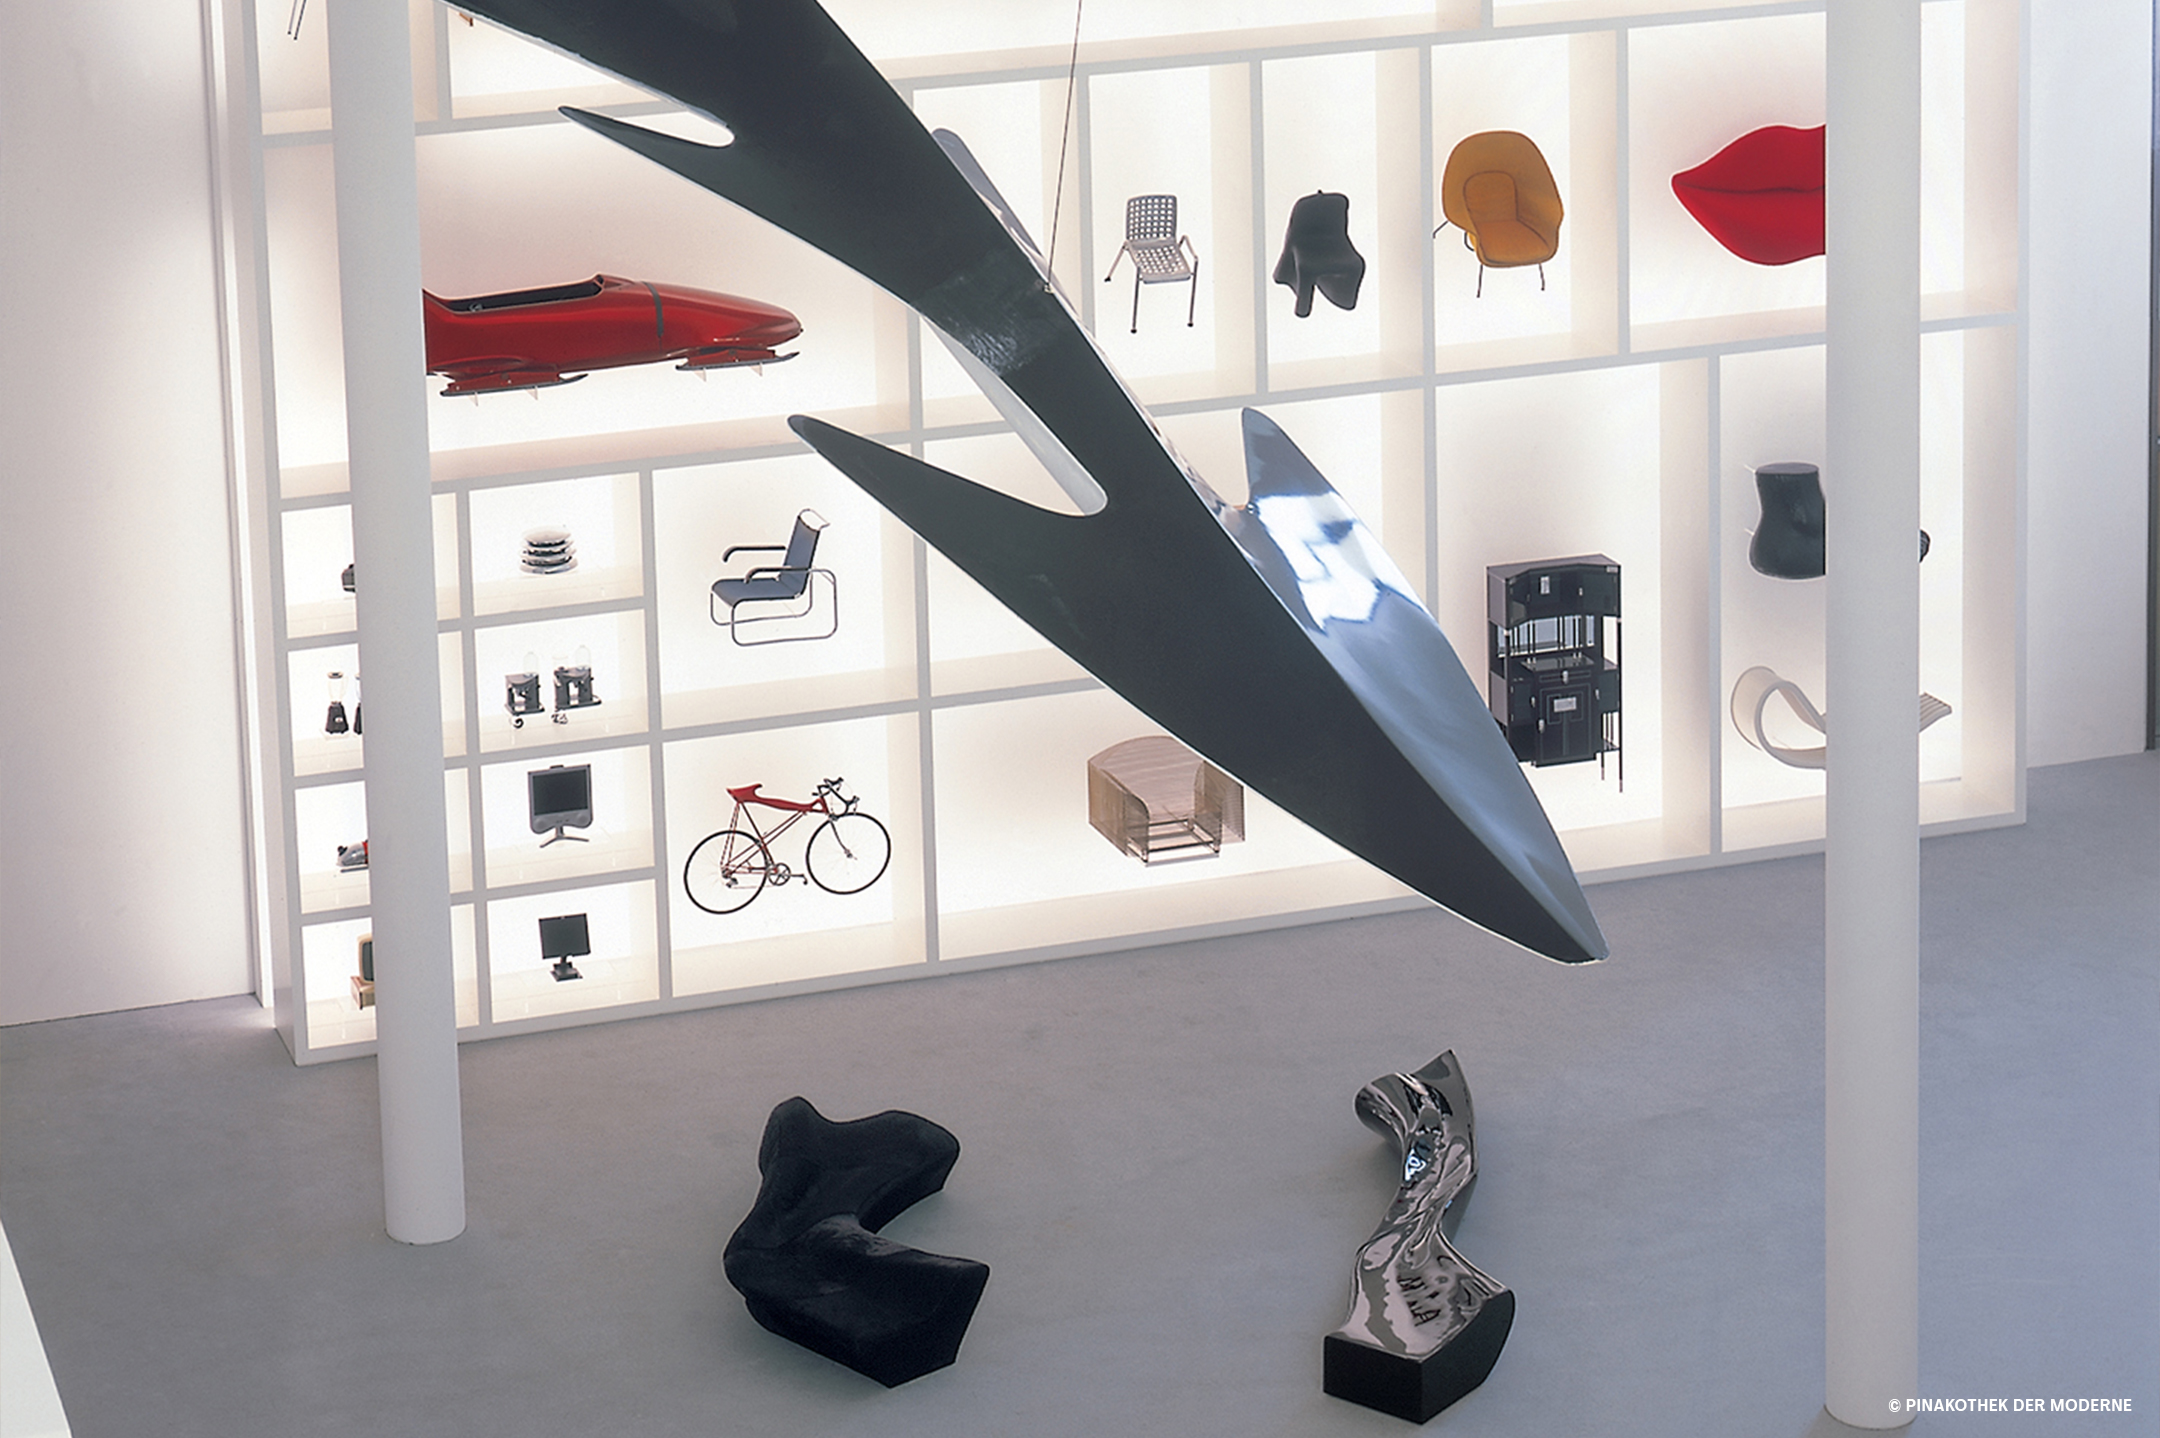 Artworks and product design drafts arranged in a white shelf illuminated from behind, two sculptures in the front, another one suspended from the ceiling